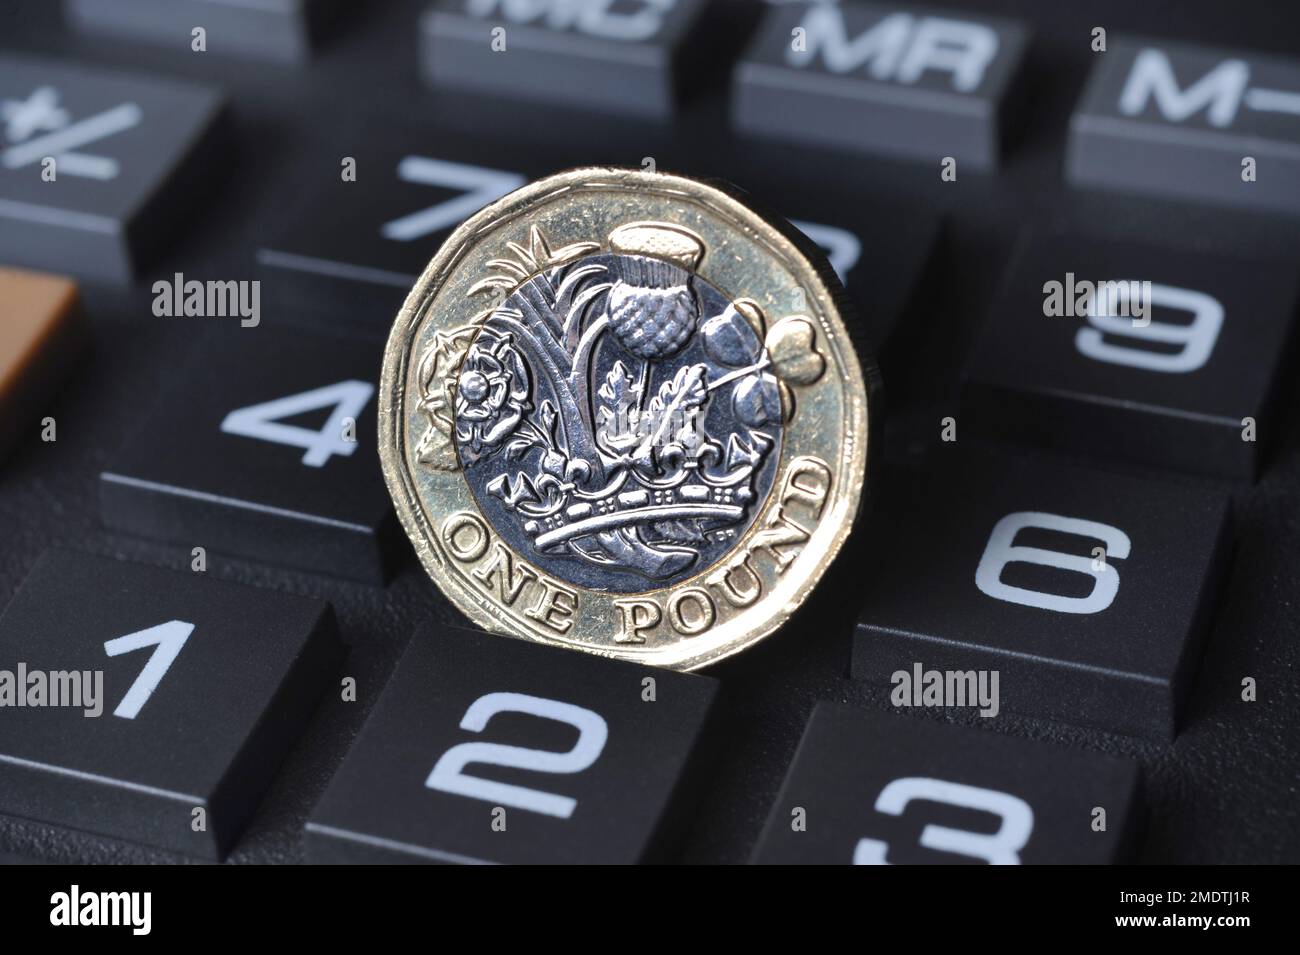 ONE POUND COIN ON CALCULATOR RE COST OF LIVING CRISIS MORTGAGES INFLATION INTEREST RATES THE ECONOMY ETC UK Stock Photo